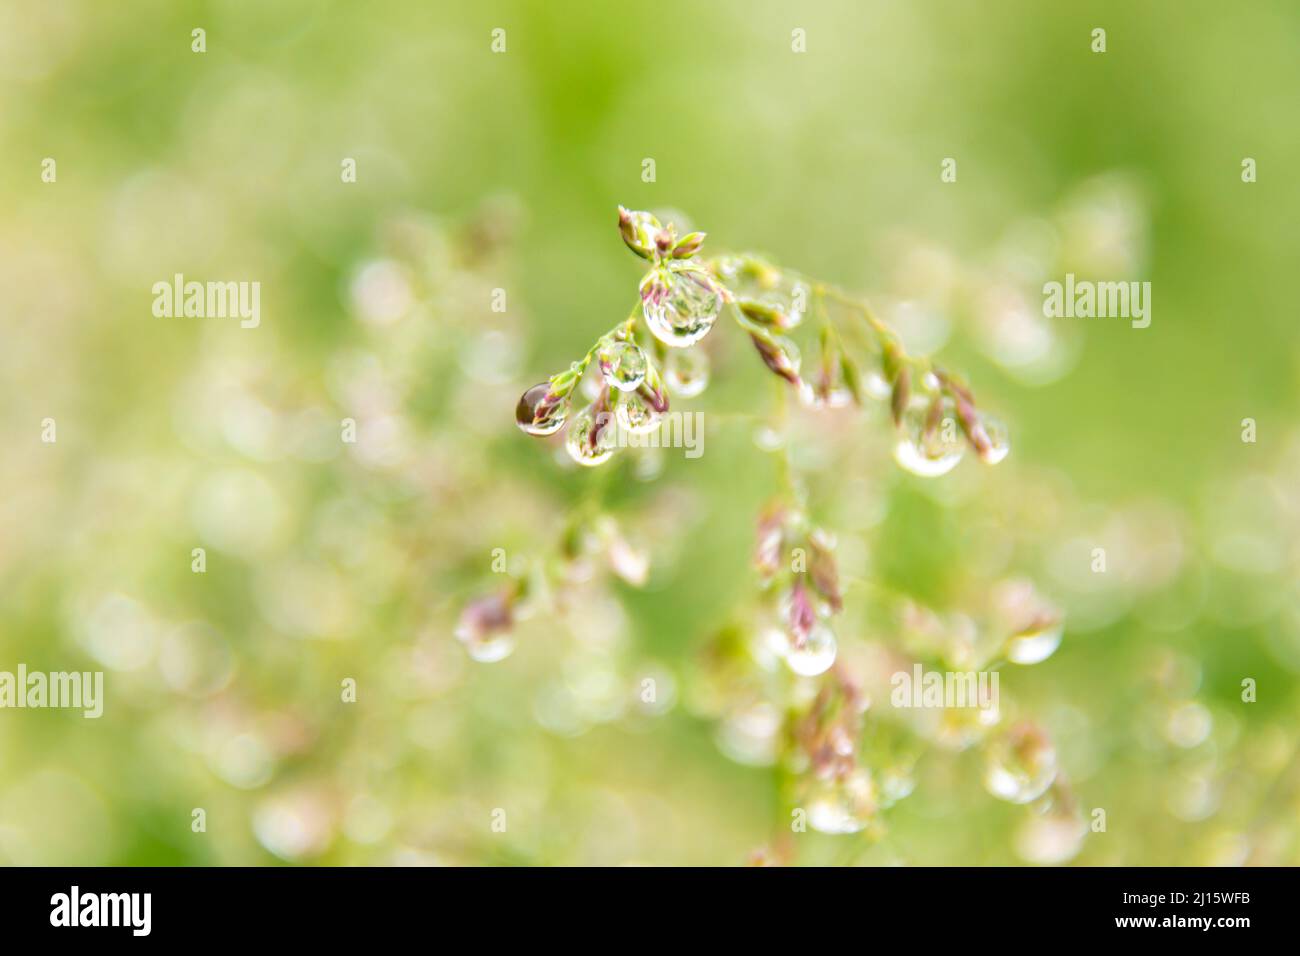 large drops of abundant dew or rain on the seed panicles of bluegrass meadow, selective focus Stock Photo